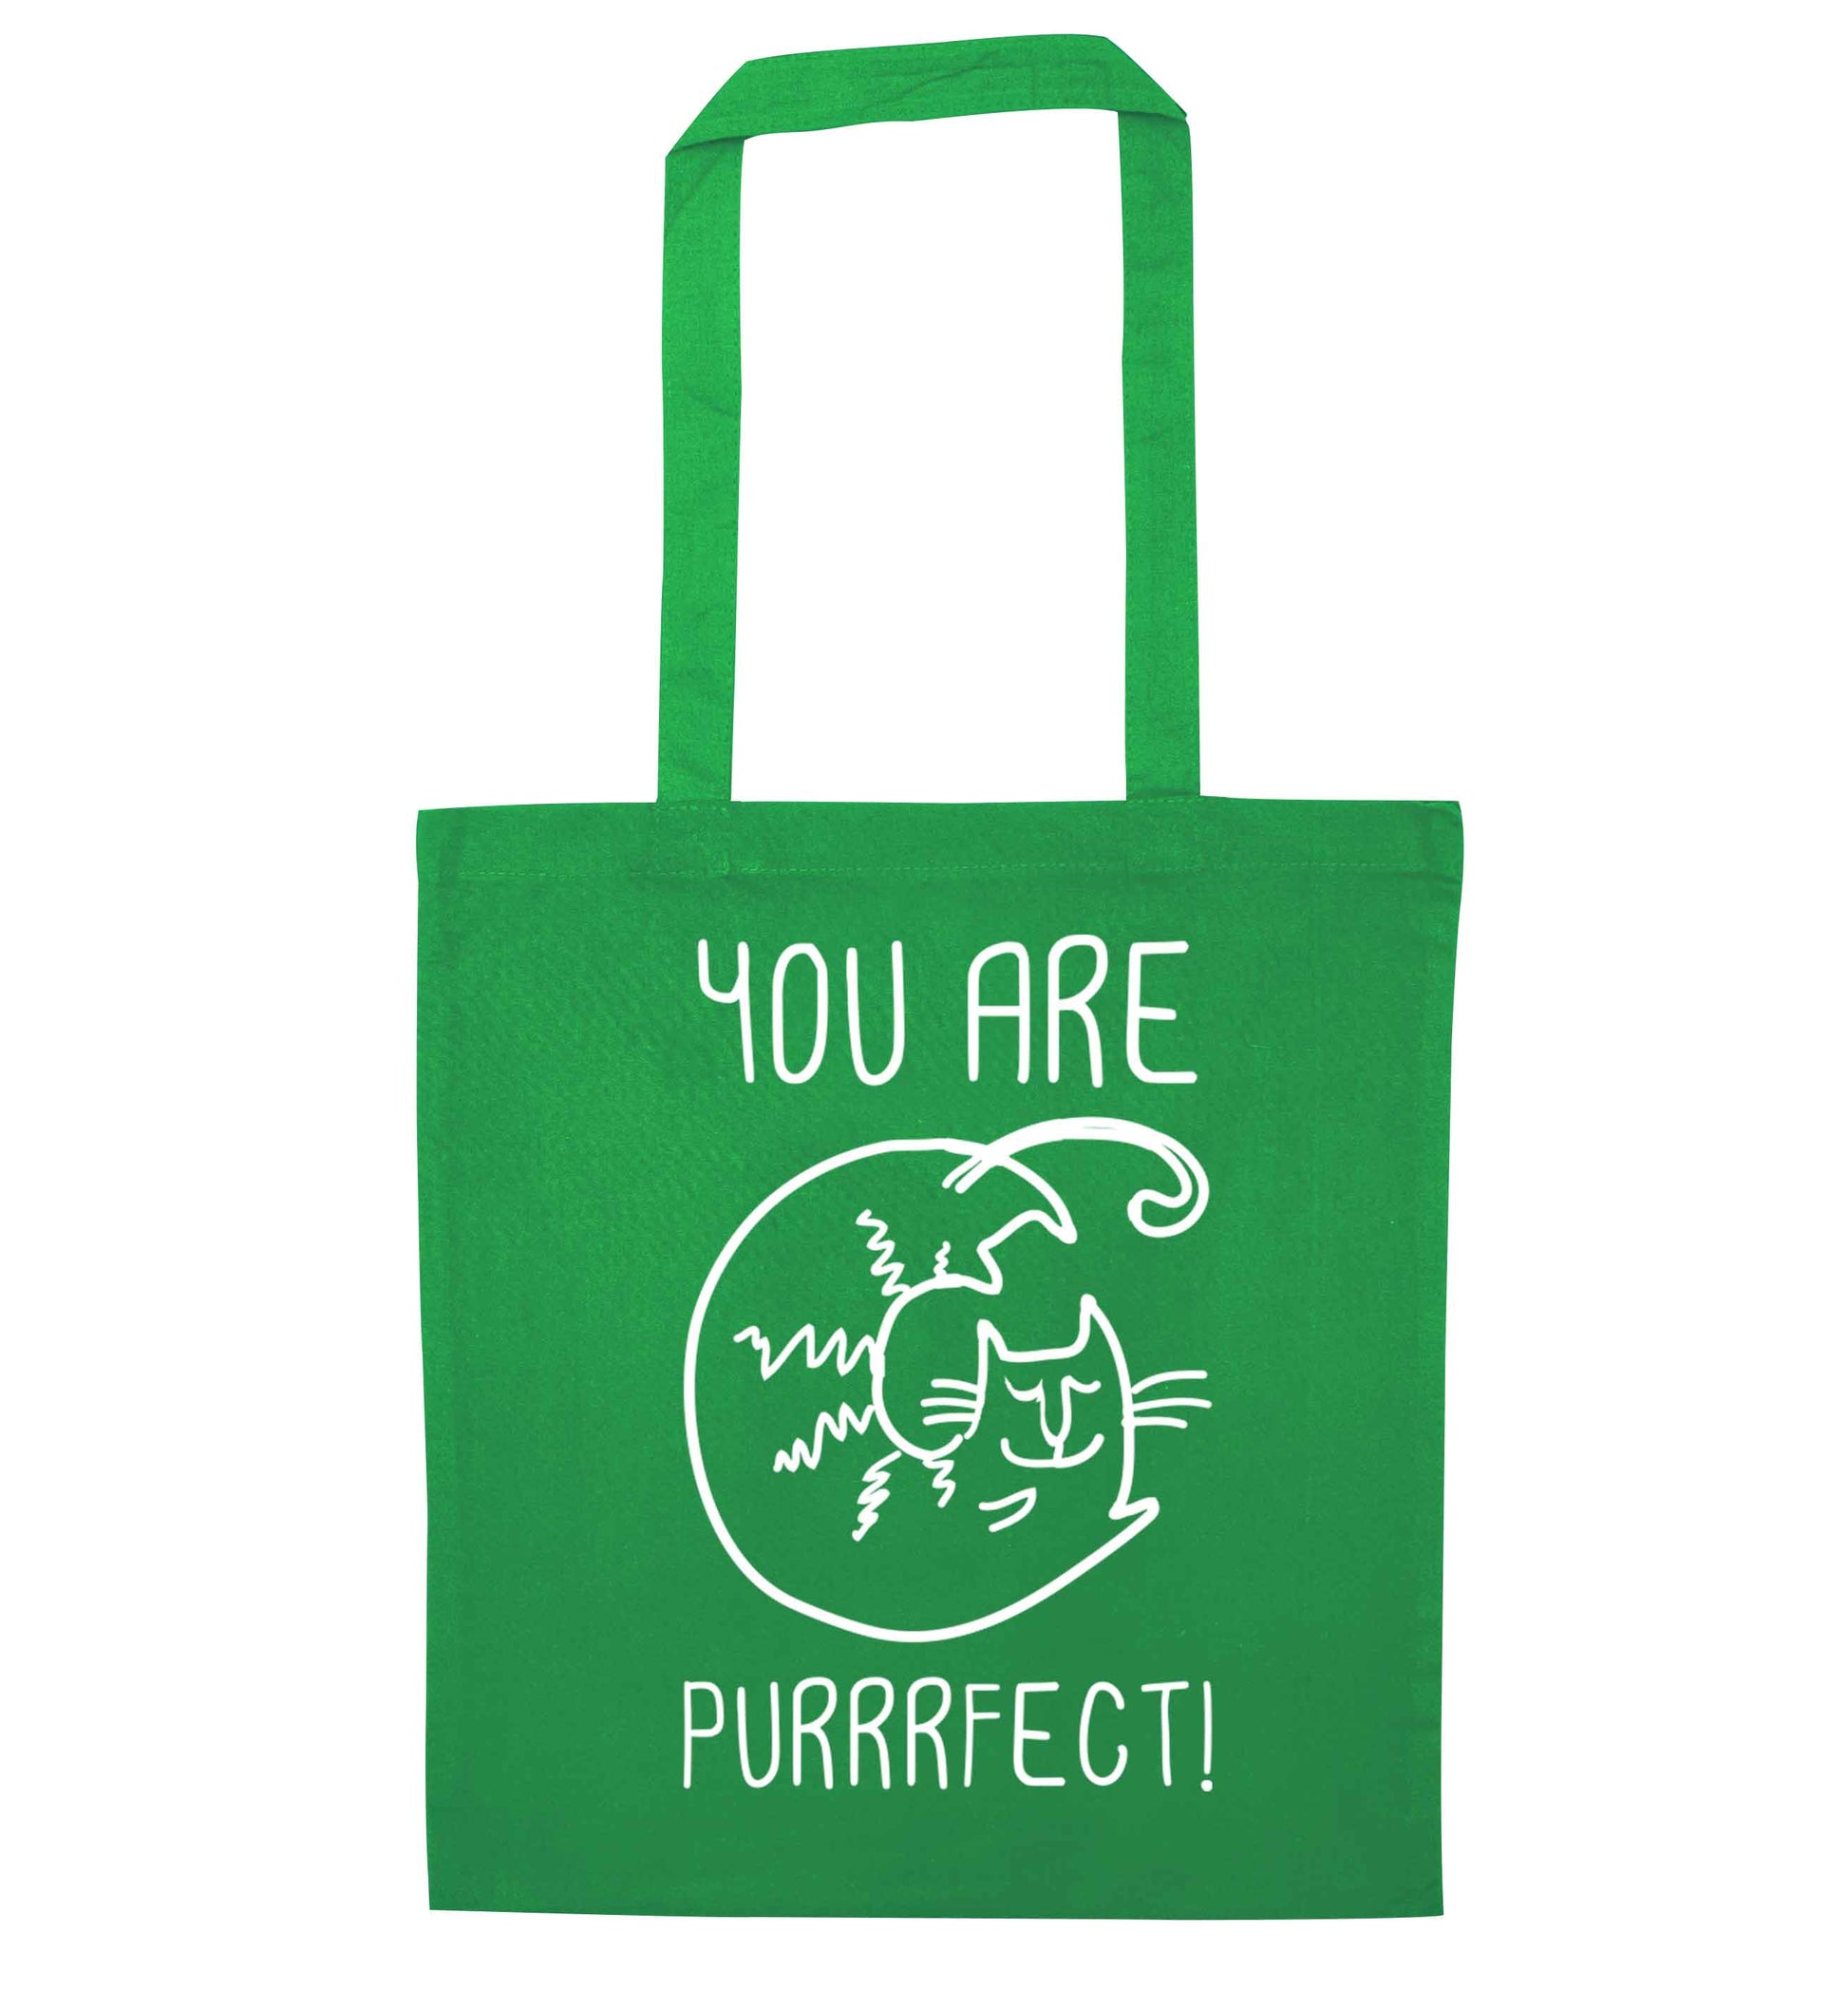 You are purrfect green tote bag